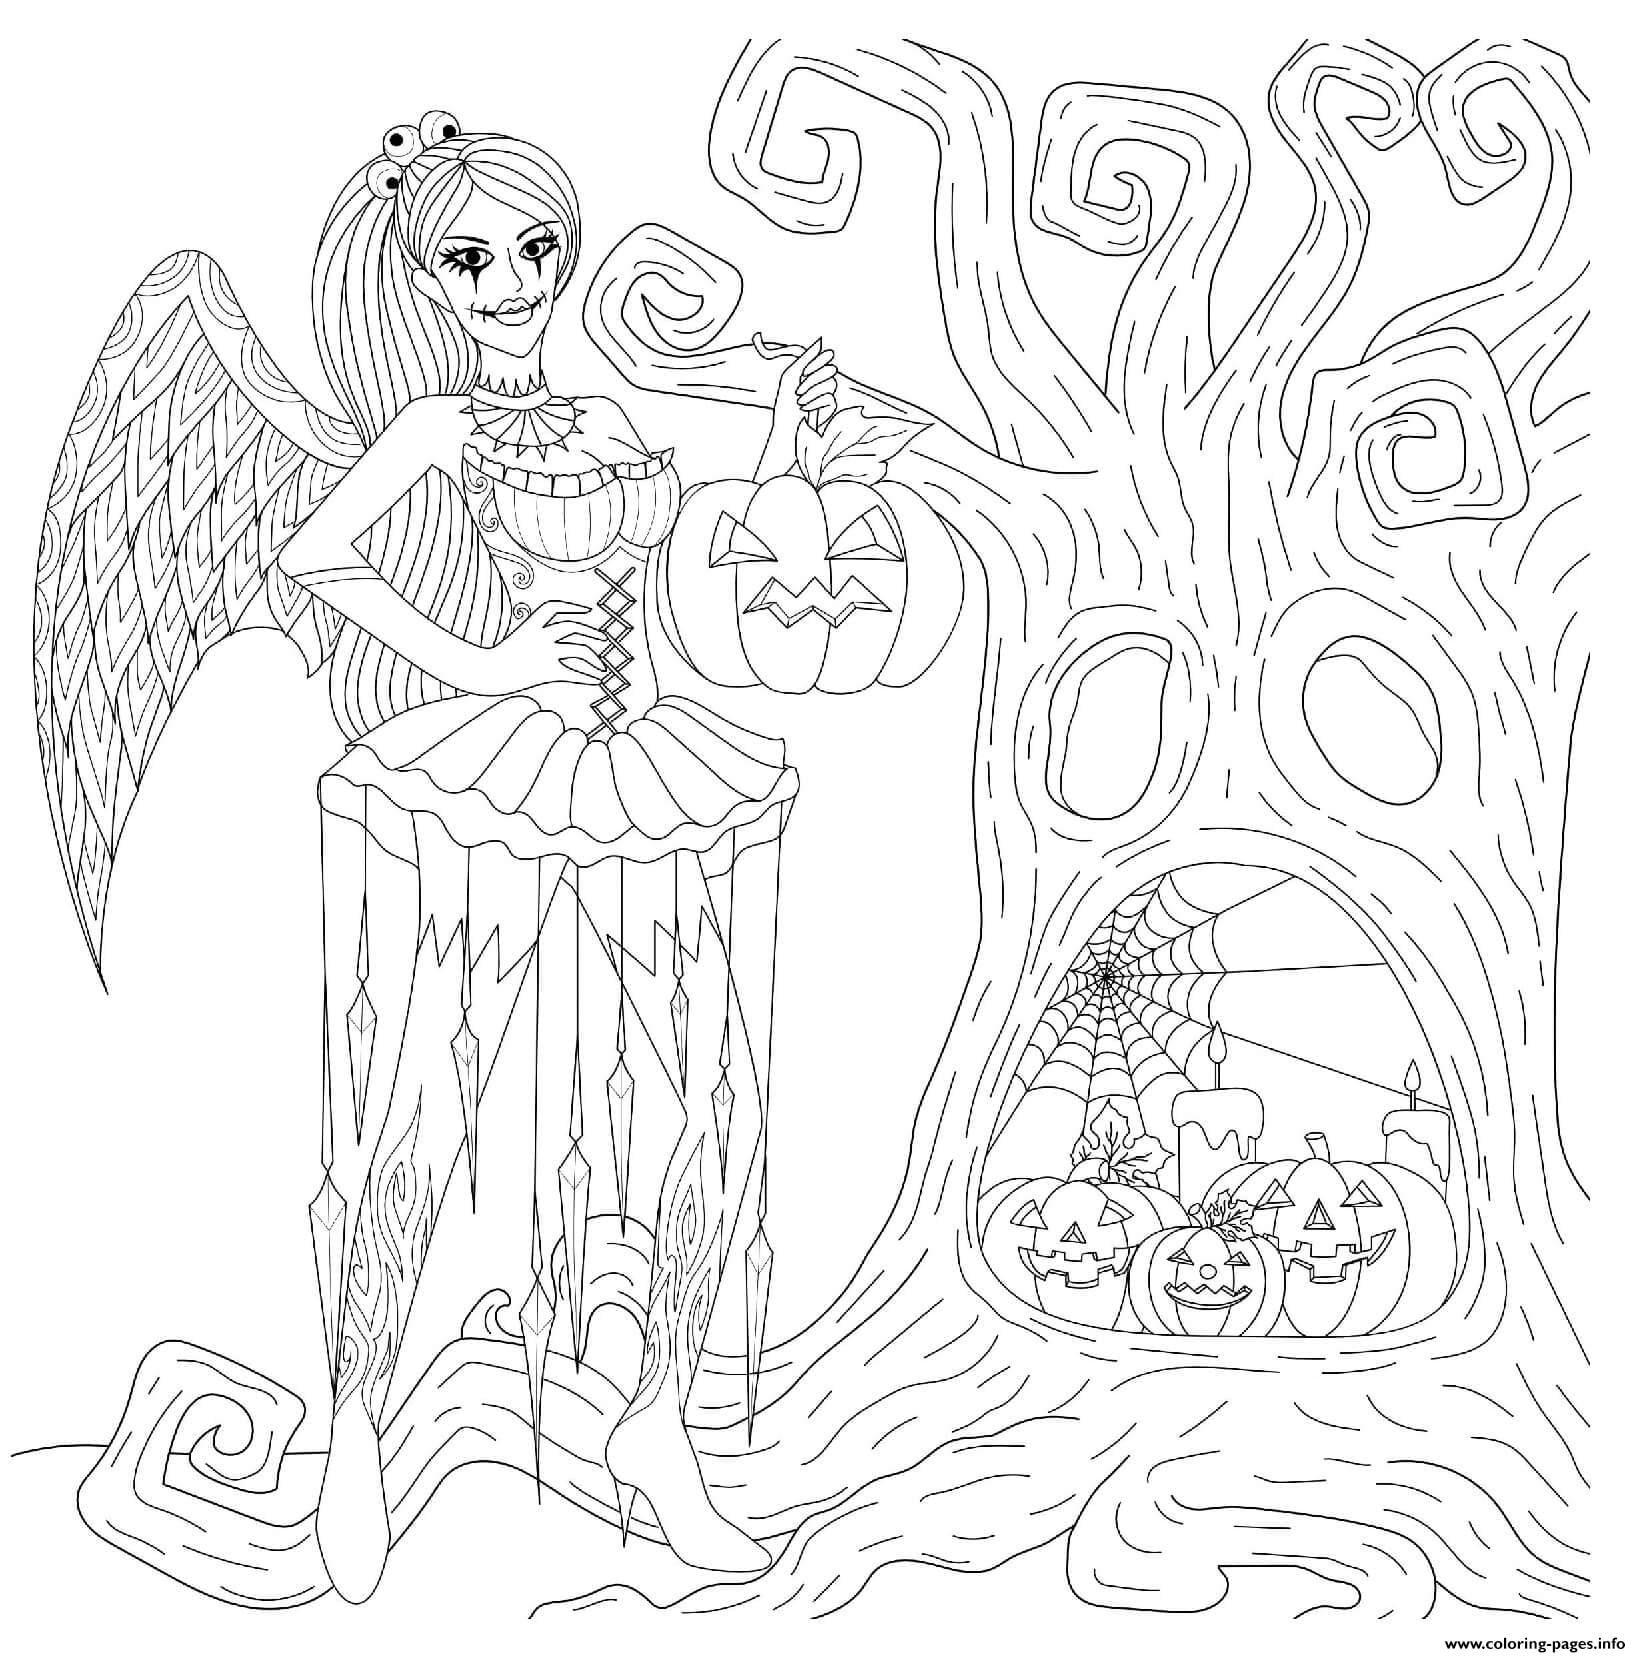 Printable Halloween Coloring Pages For Adults   POPSUGAR Smart Living